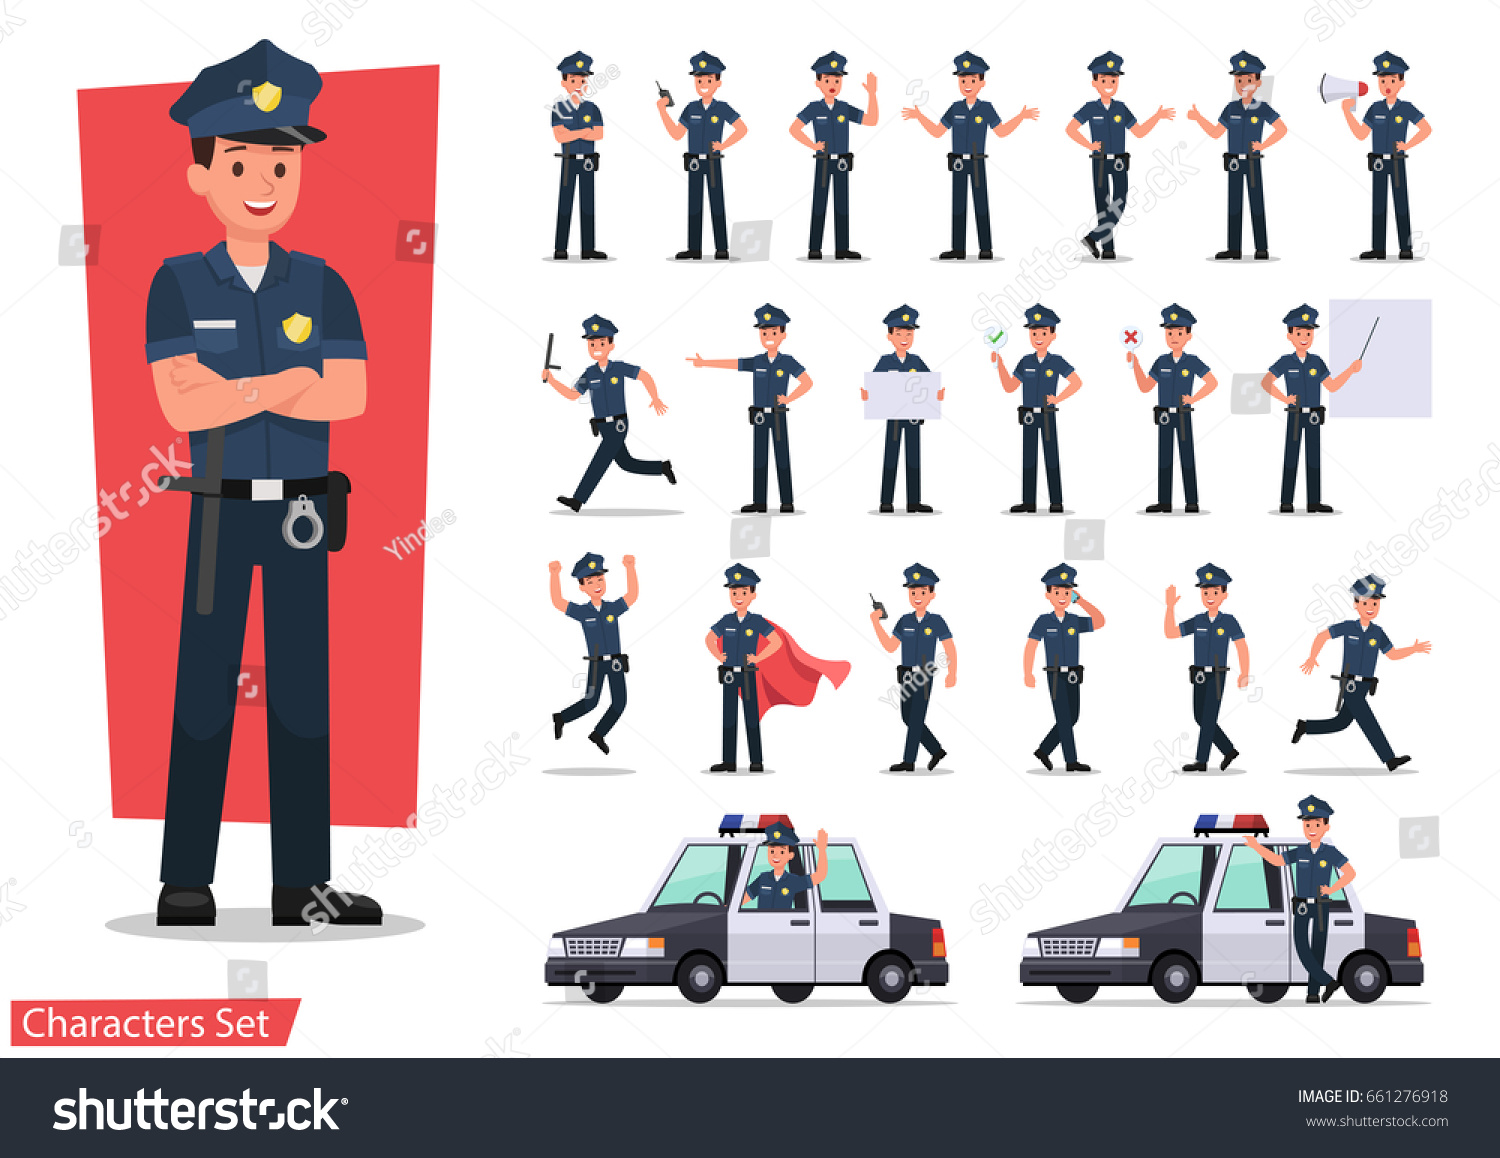 SVG of police character vector design svg